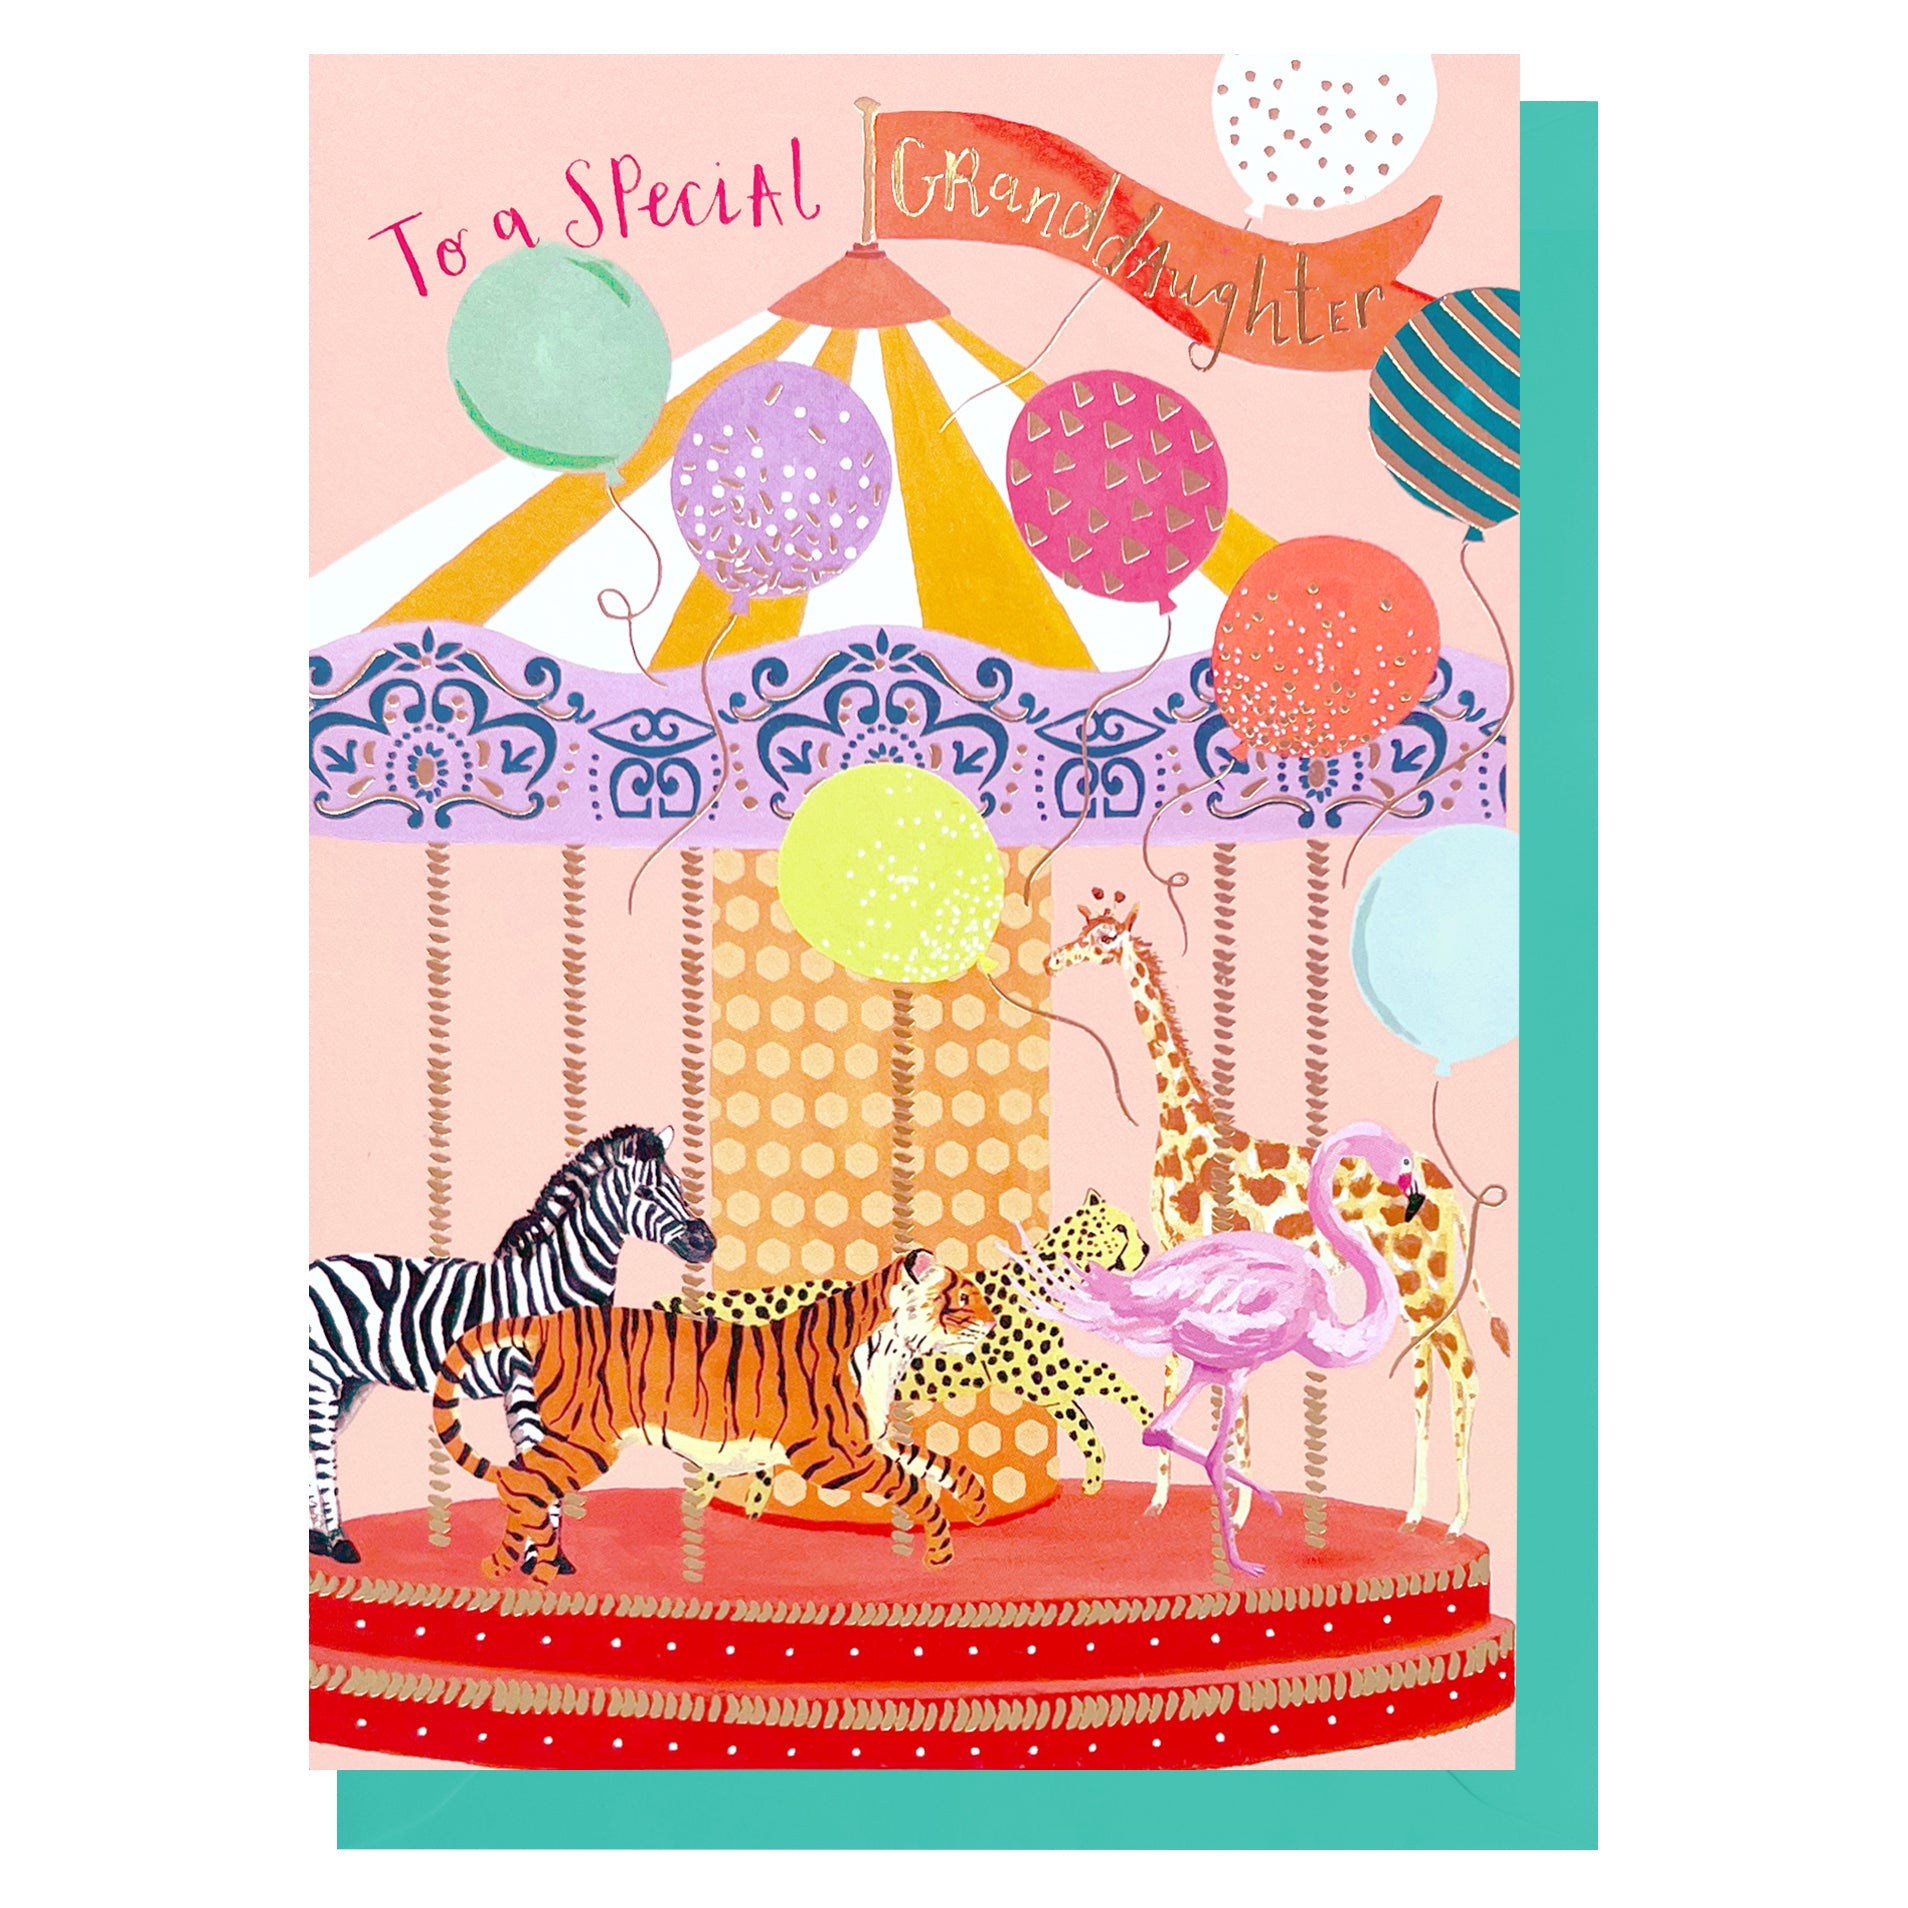 Granddaughter Merry-Go-Round Birthday Card from Penny Black